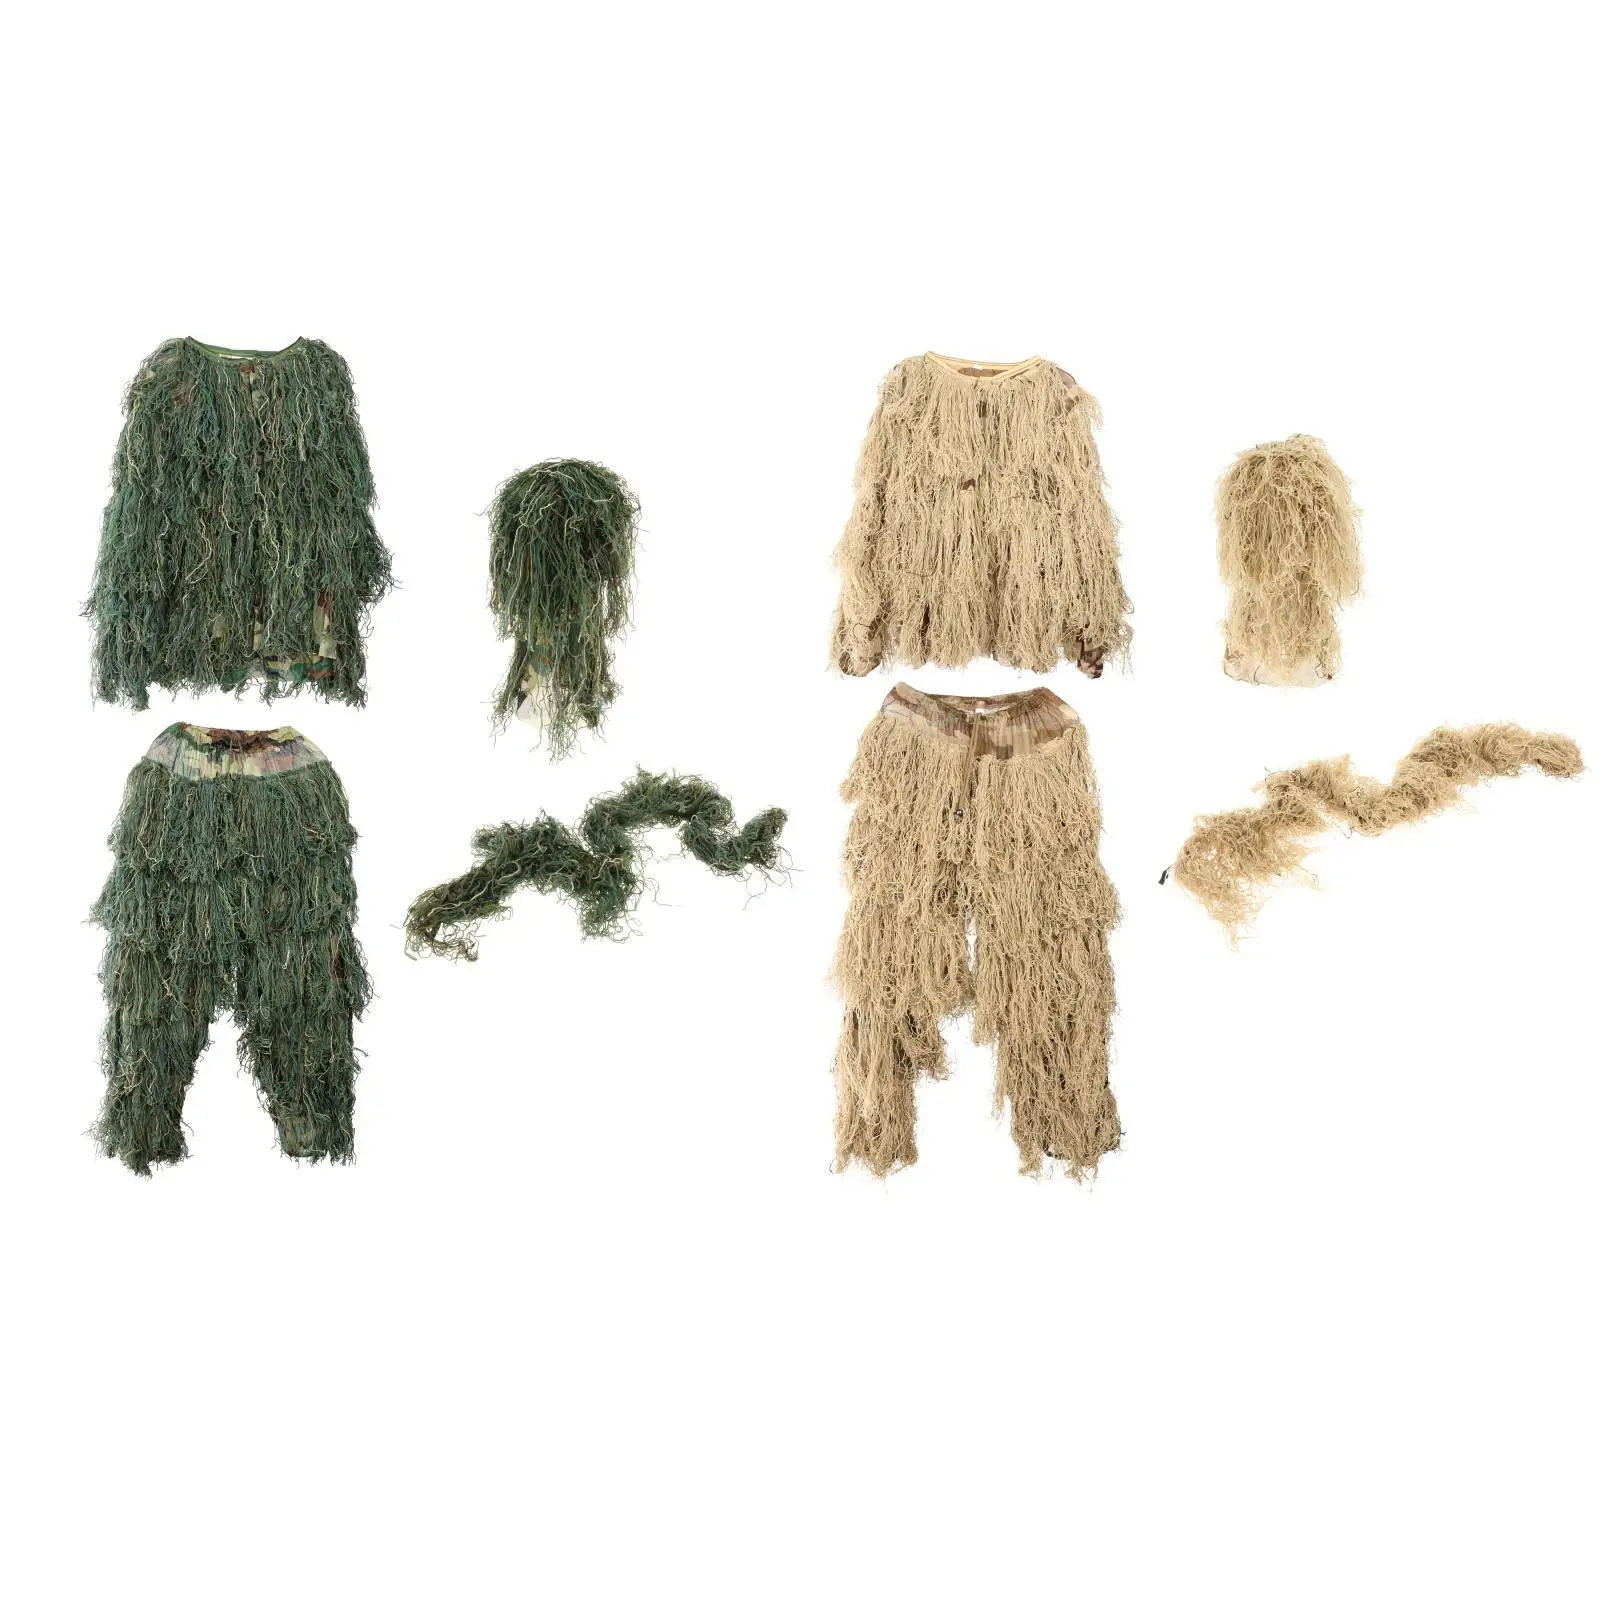 Camo Hooded Stretchy Ghillie Suits Clothes Jacket Pants for Hunting